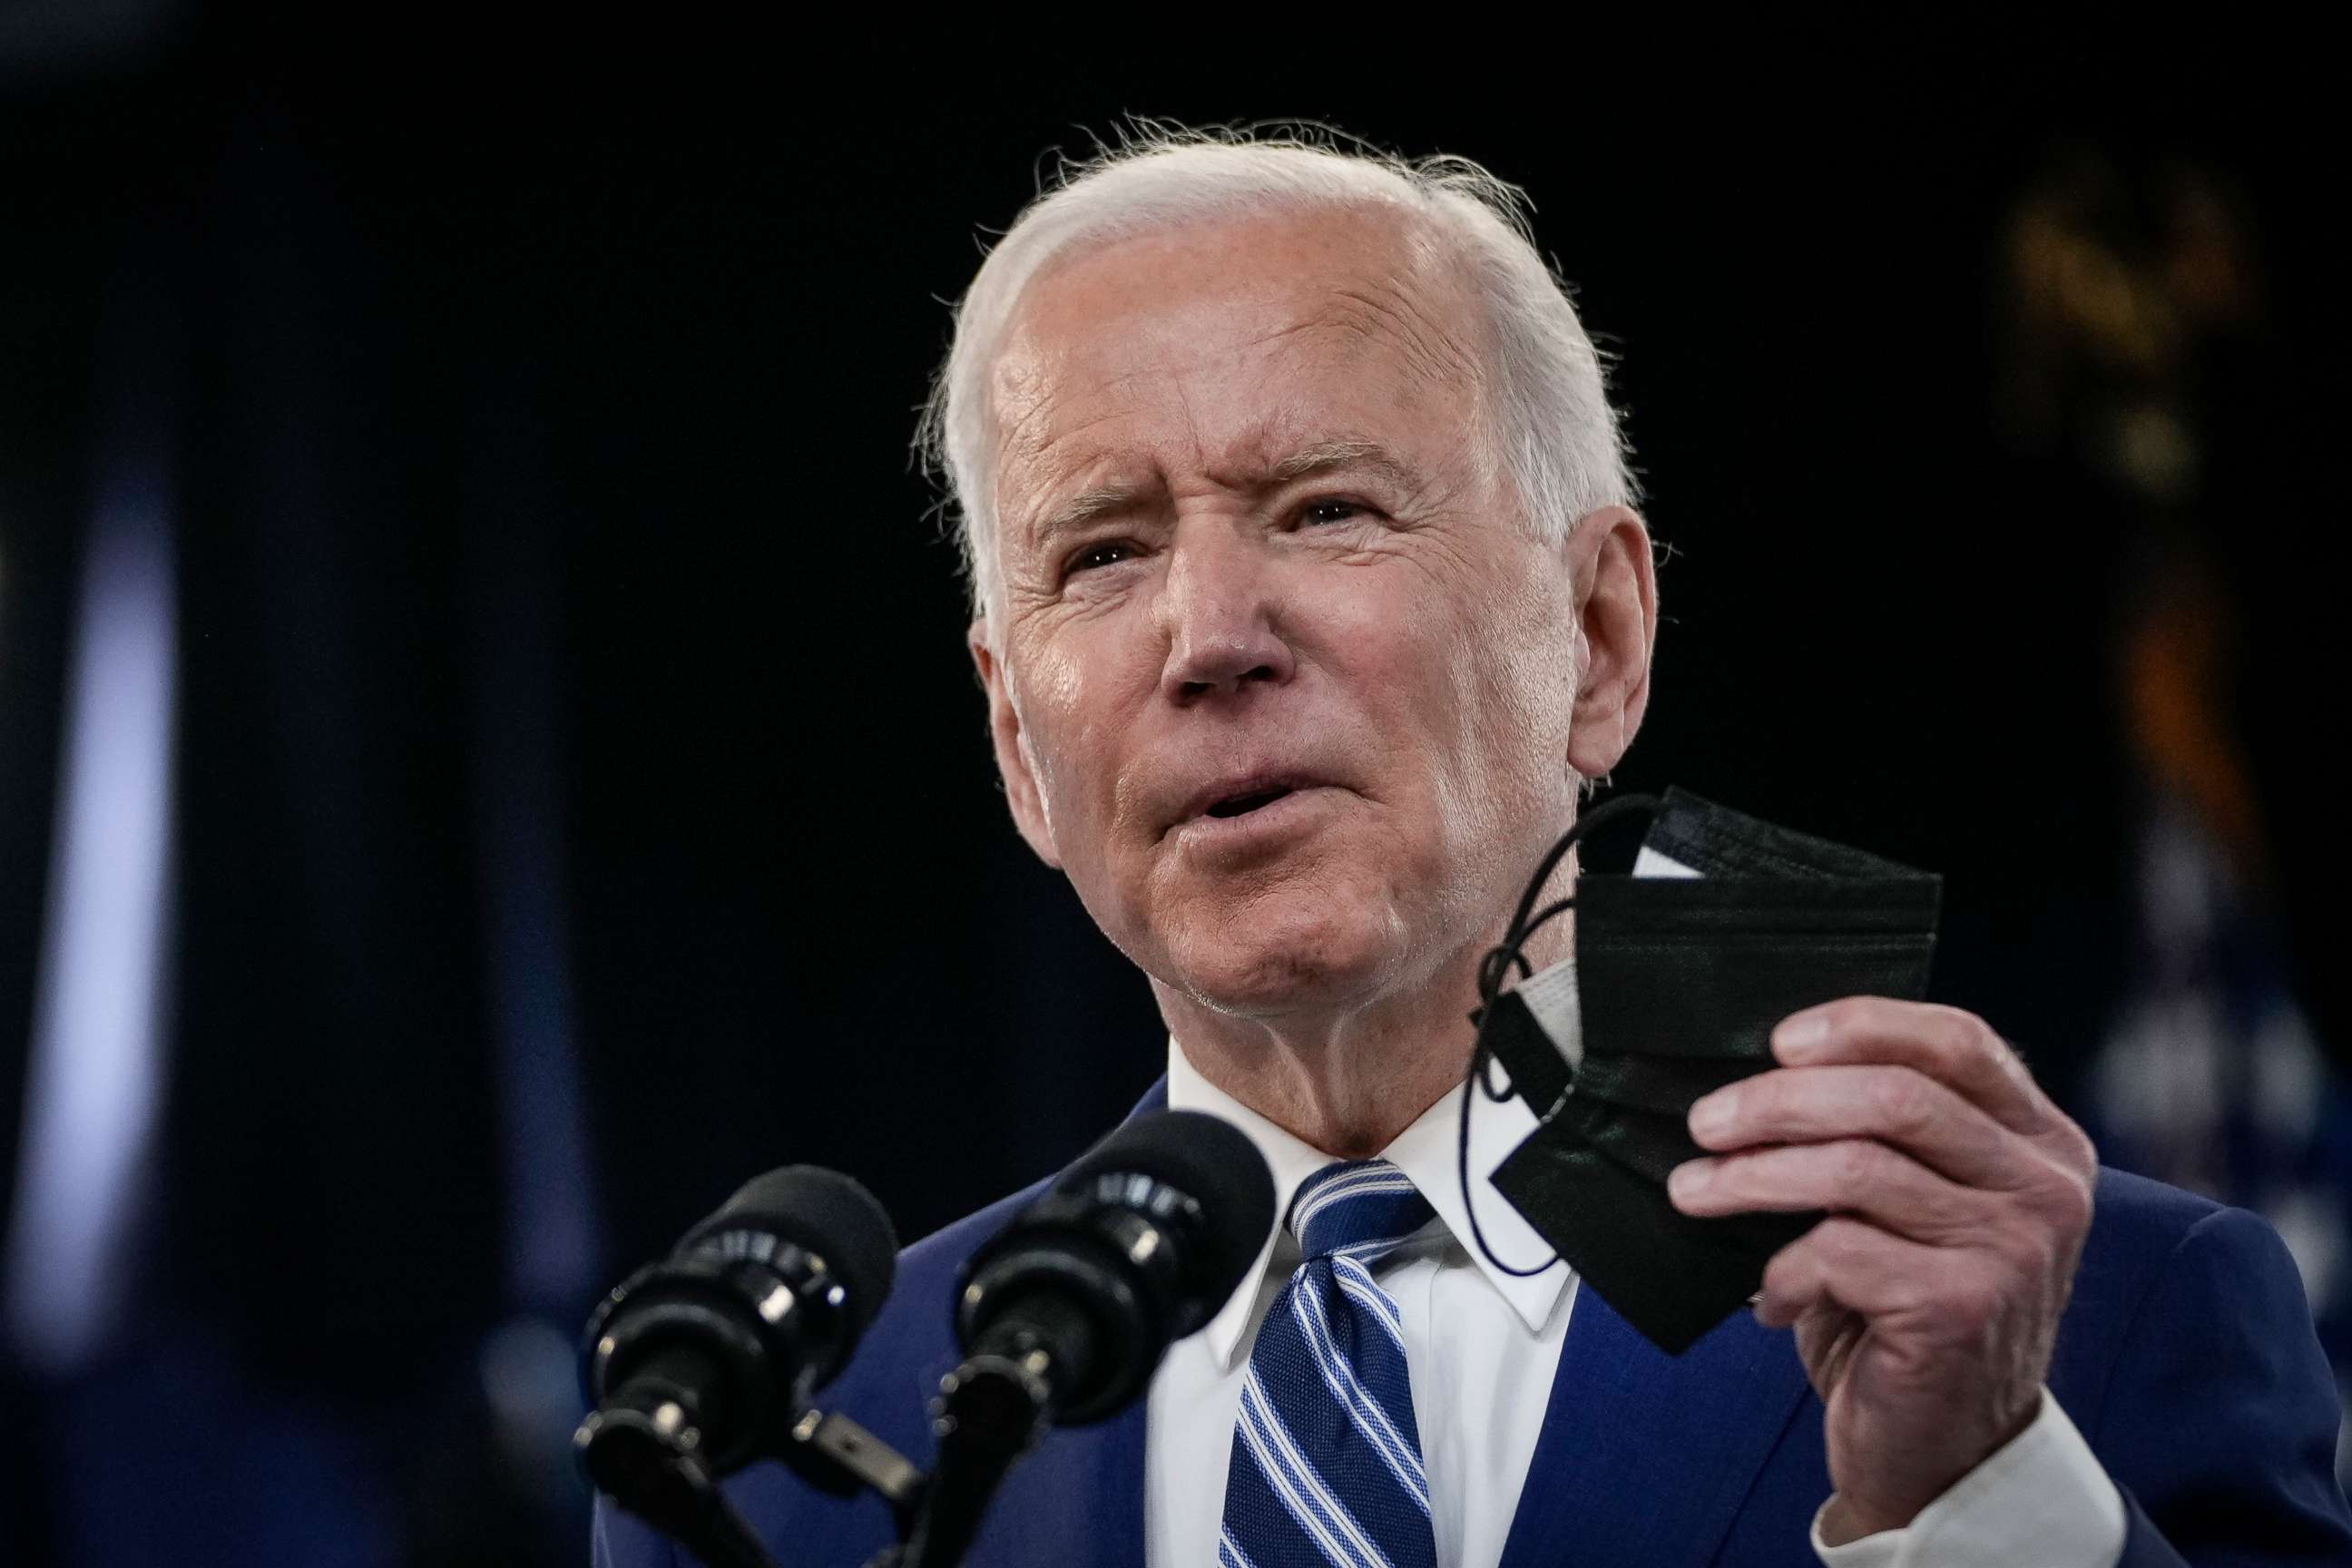 PHOTO: President Joe Biden holds up a face mask as he delivers remarks on the COVID-19 response and the state of vaccinations on March 29, 2021.